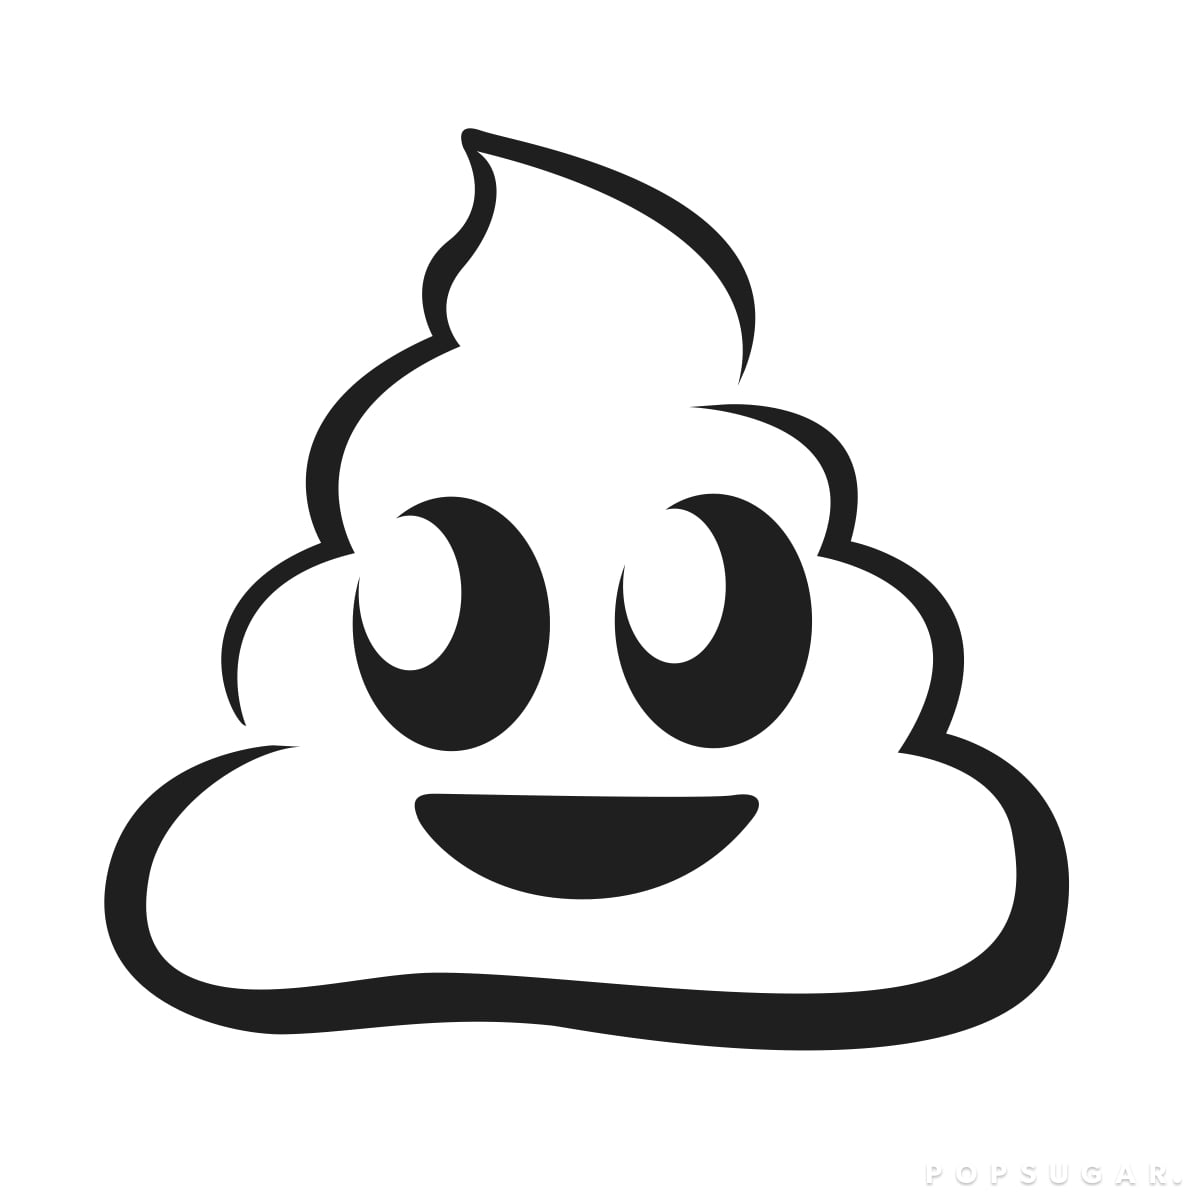 pile-of-poo-emoji-templates-by-morgan-pugh-49-free-templates-for-the